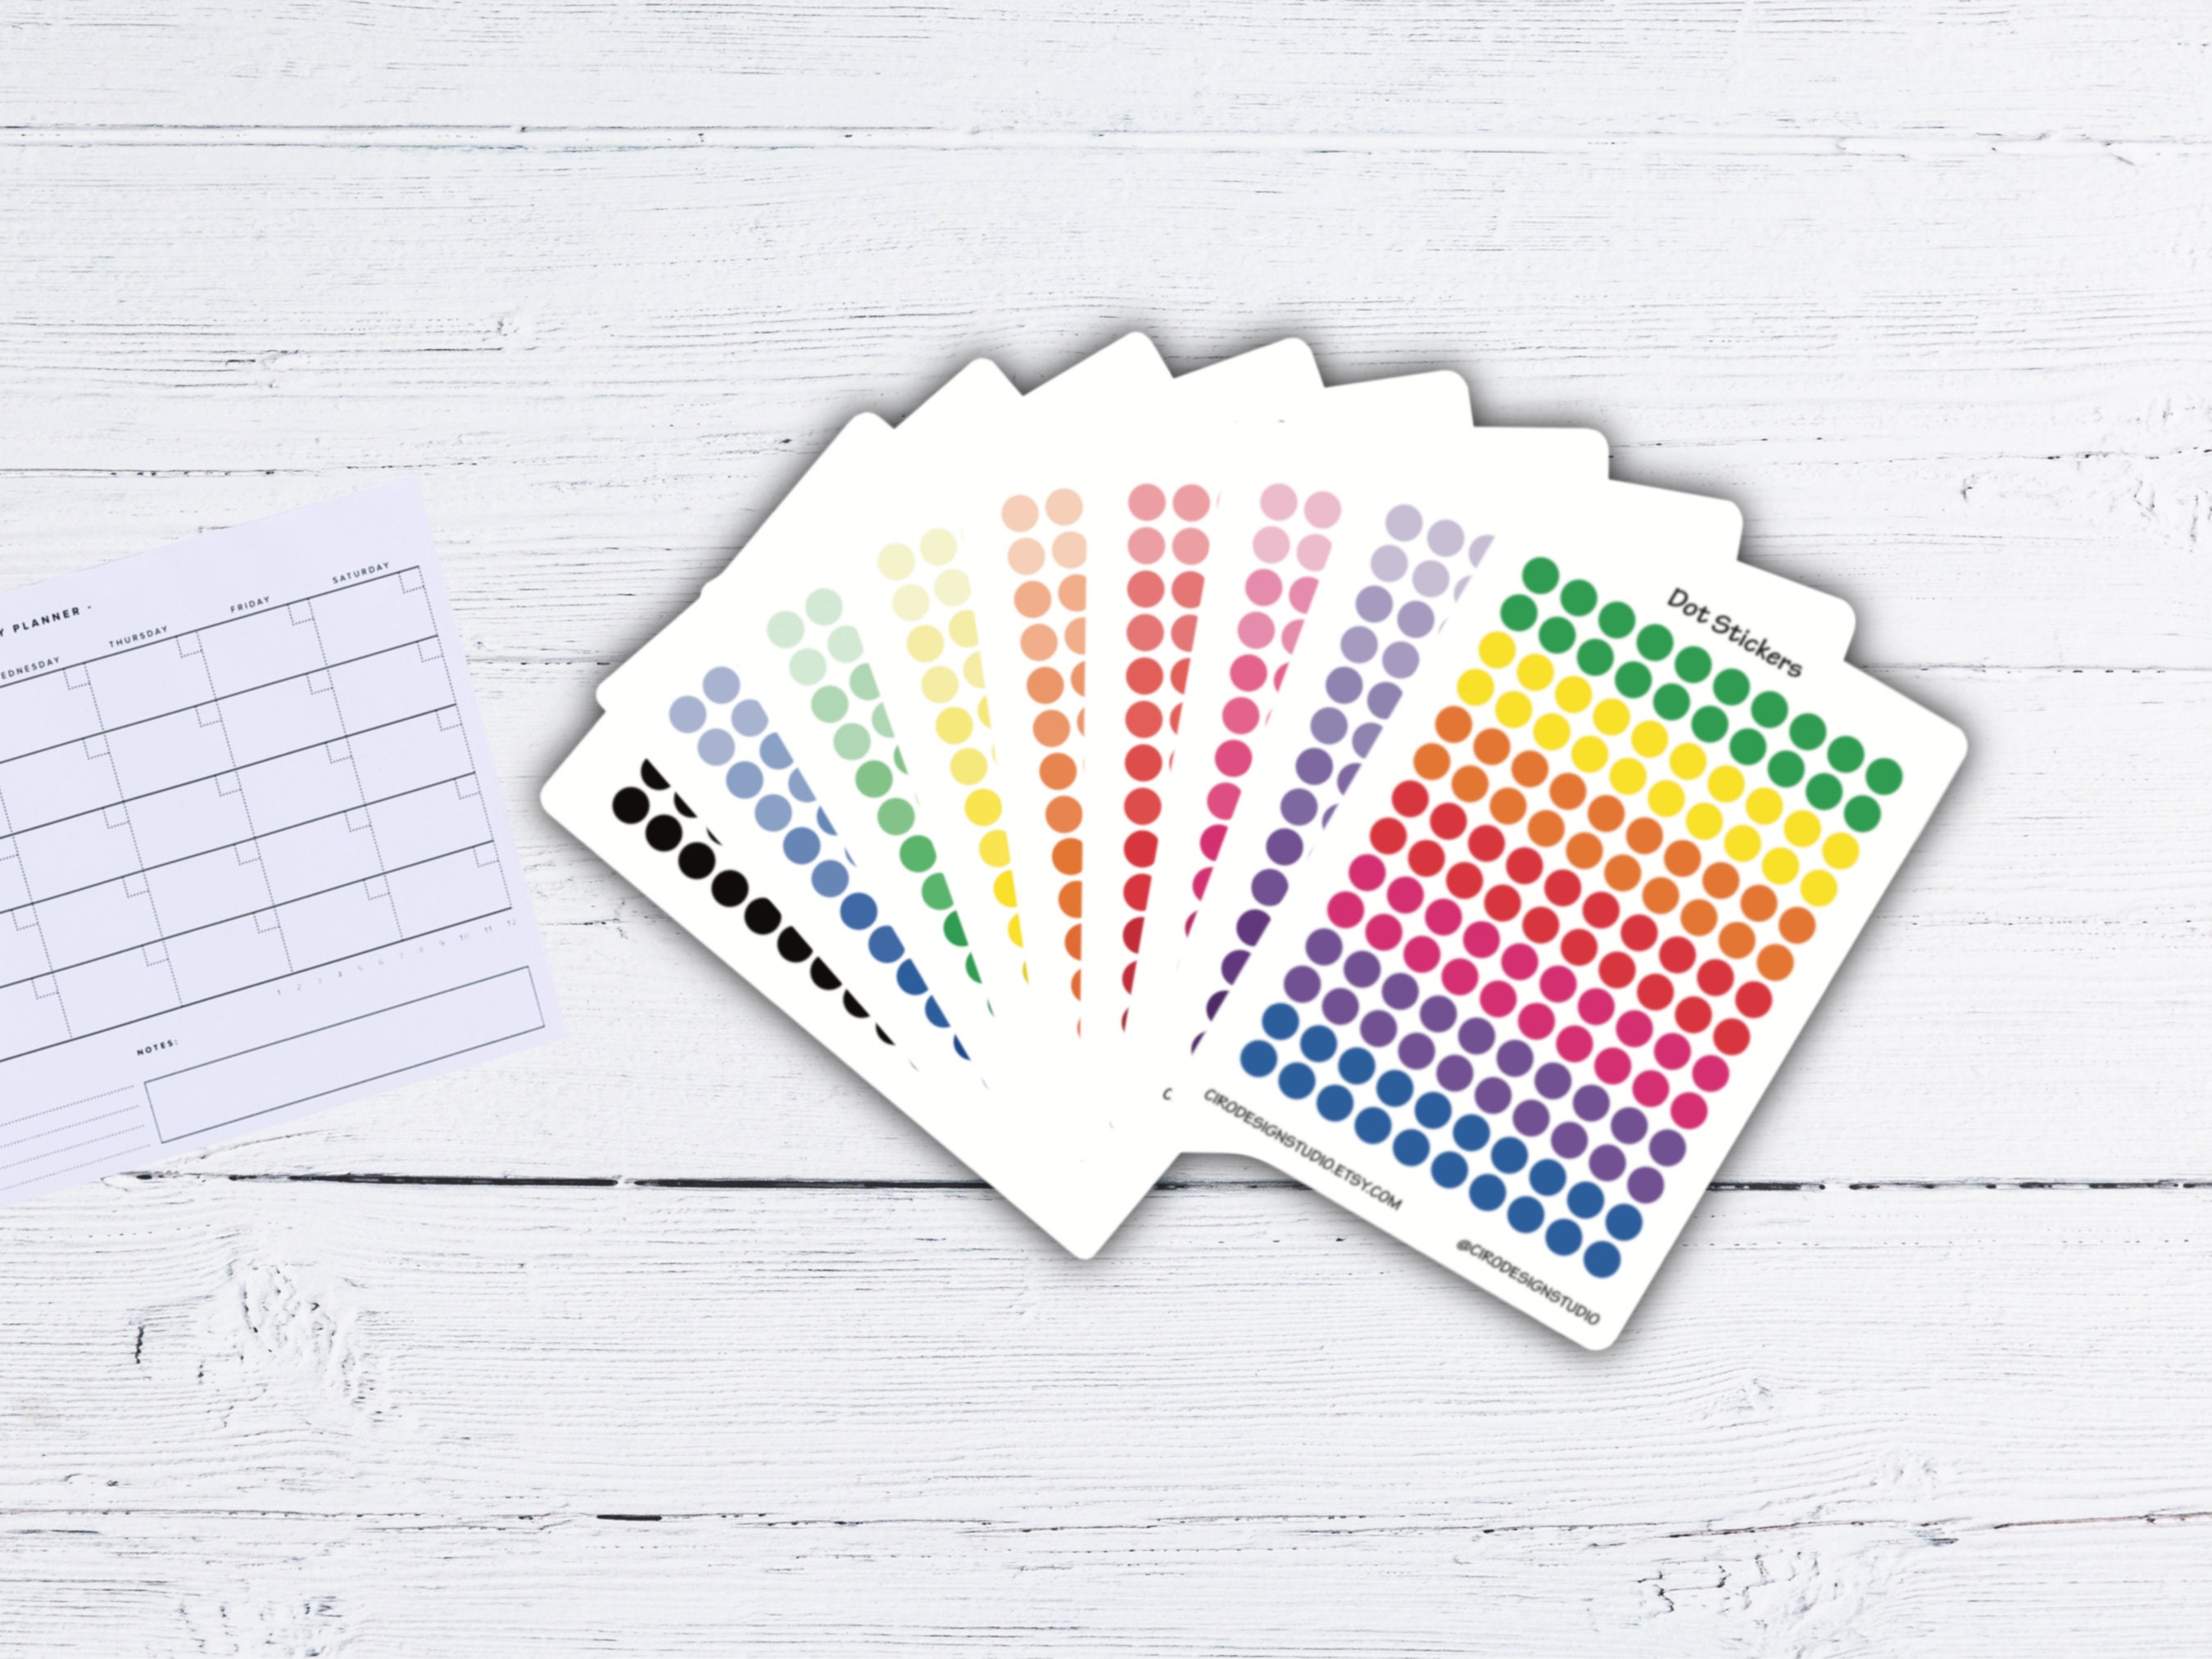 700 Sticky Coloured Dots - 8mm - Easy Peel Self Adhesive Colour Coding  Sticky Dots - Assorted Colours - Ivy Stationery